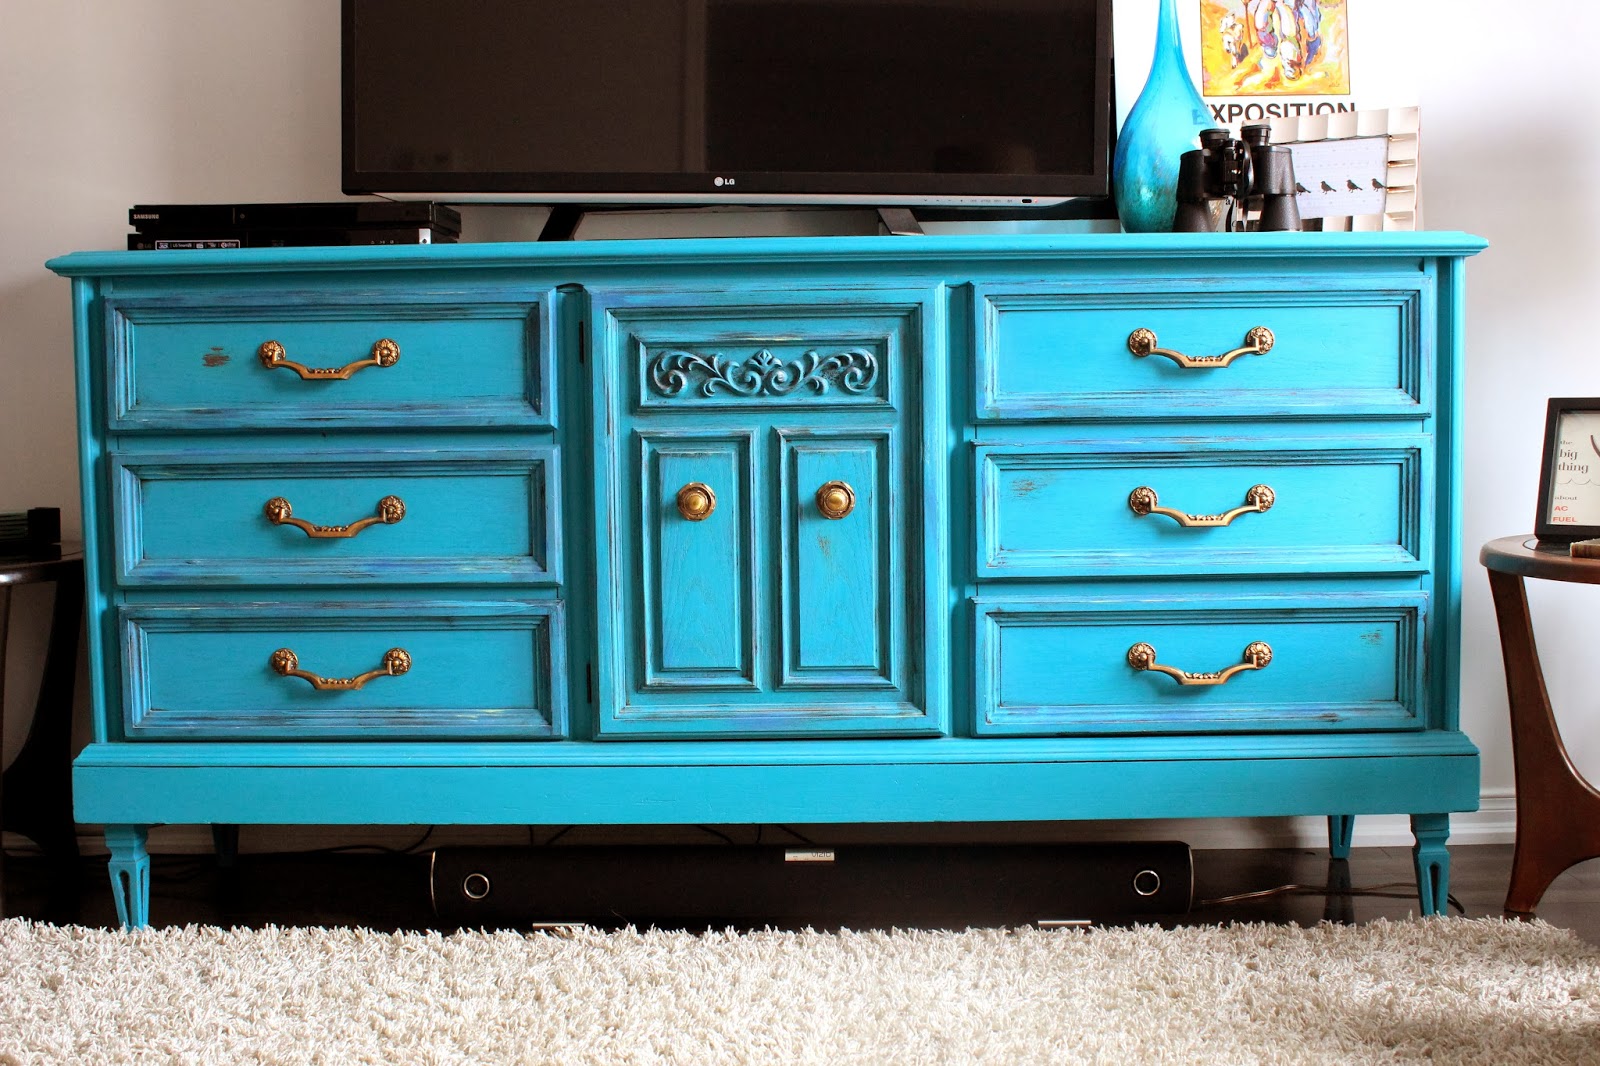 Retiqued by Rae Bond Turquoise / Blue Dresser with Gold